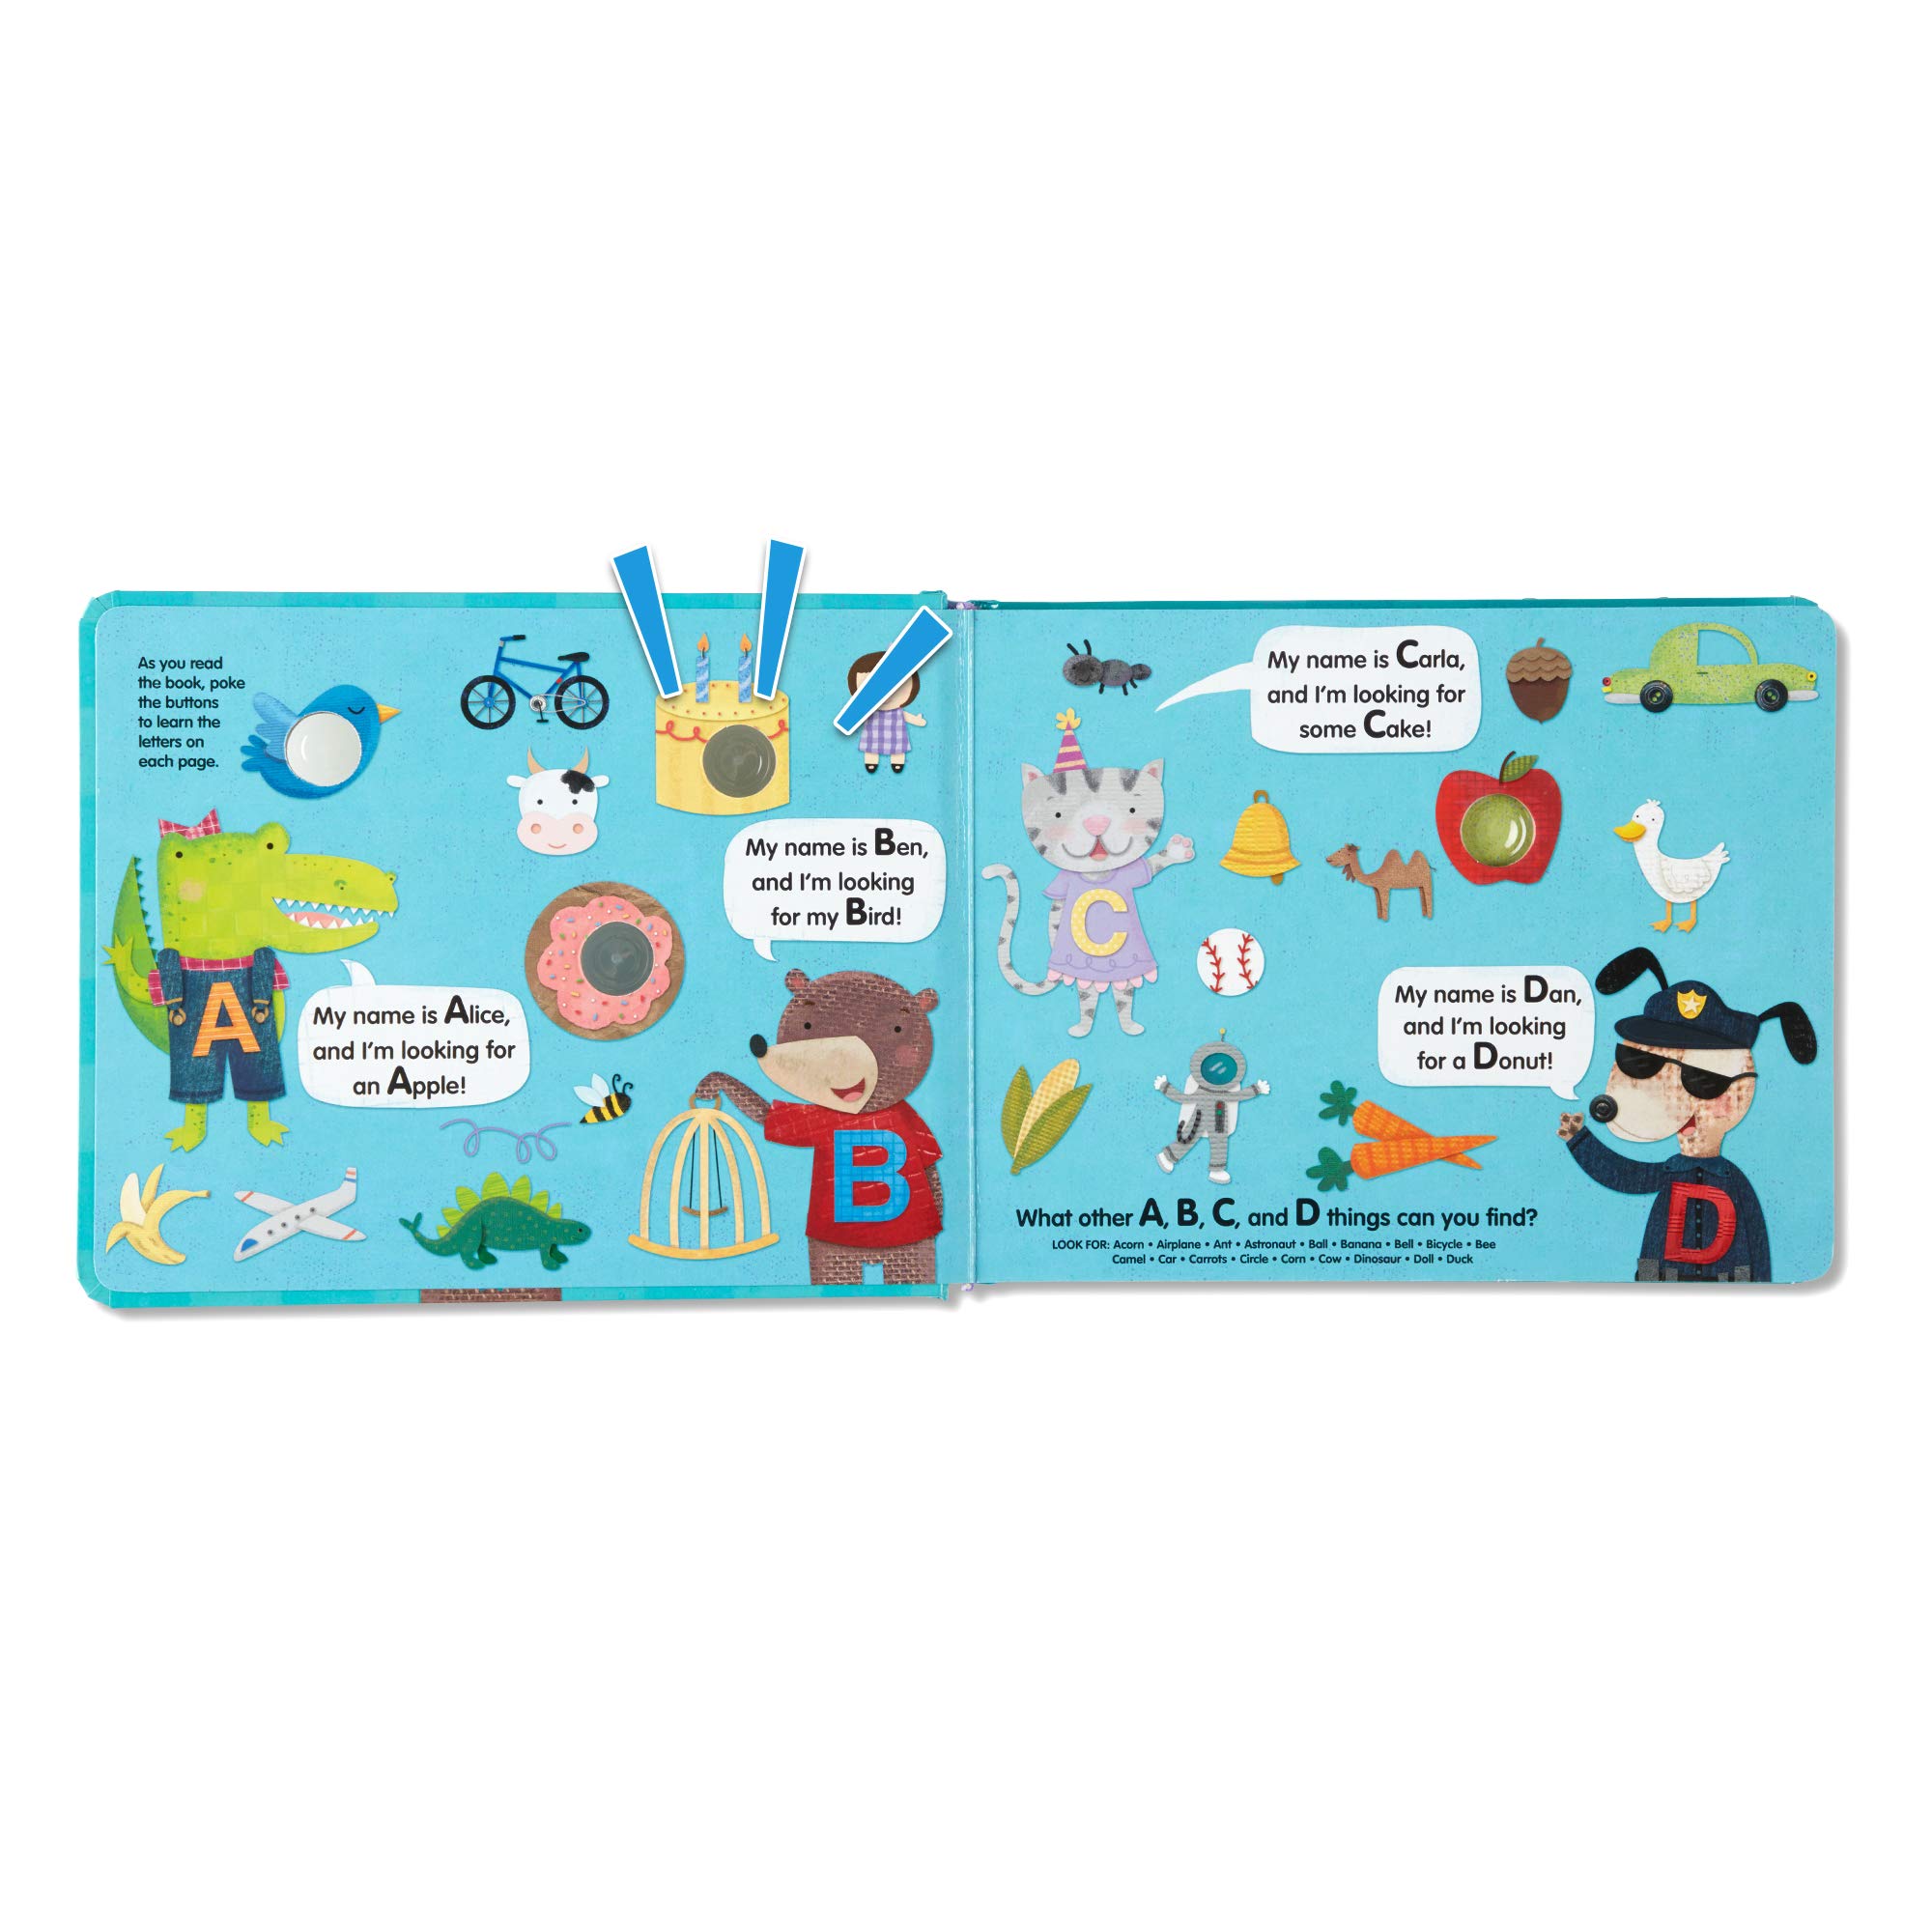 Melissa & Doug Children's Book - Poke-a-Dot: An Alphabet Eye Spy (Board Book with Buttons to Pop) - Alphabet Pop It Book, Push Pop Book For Toddlers And Kids Ages 3+